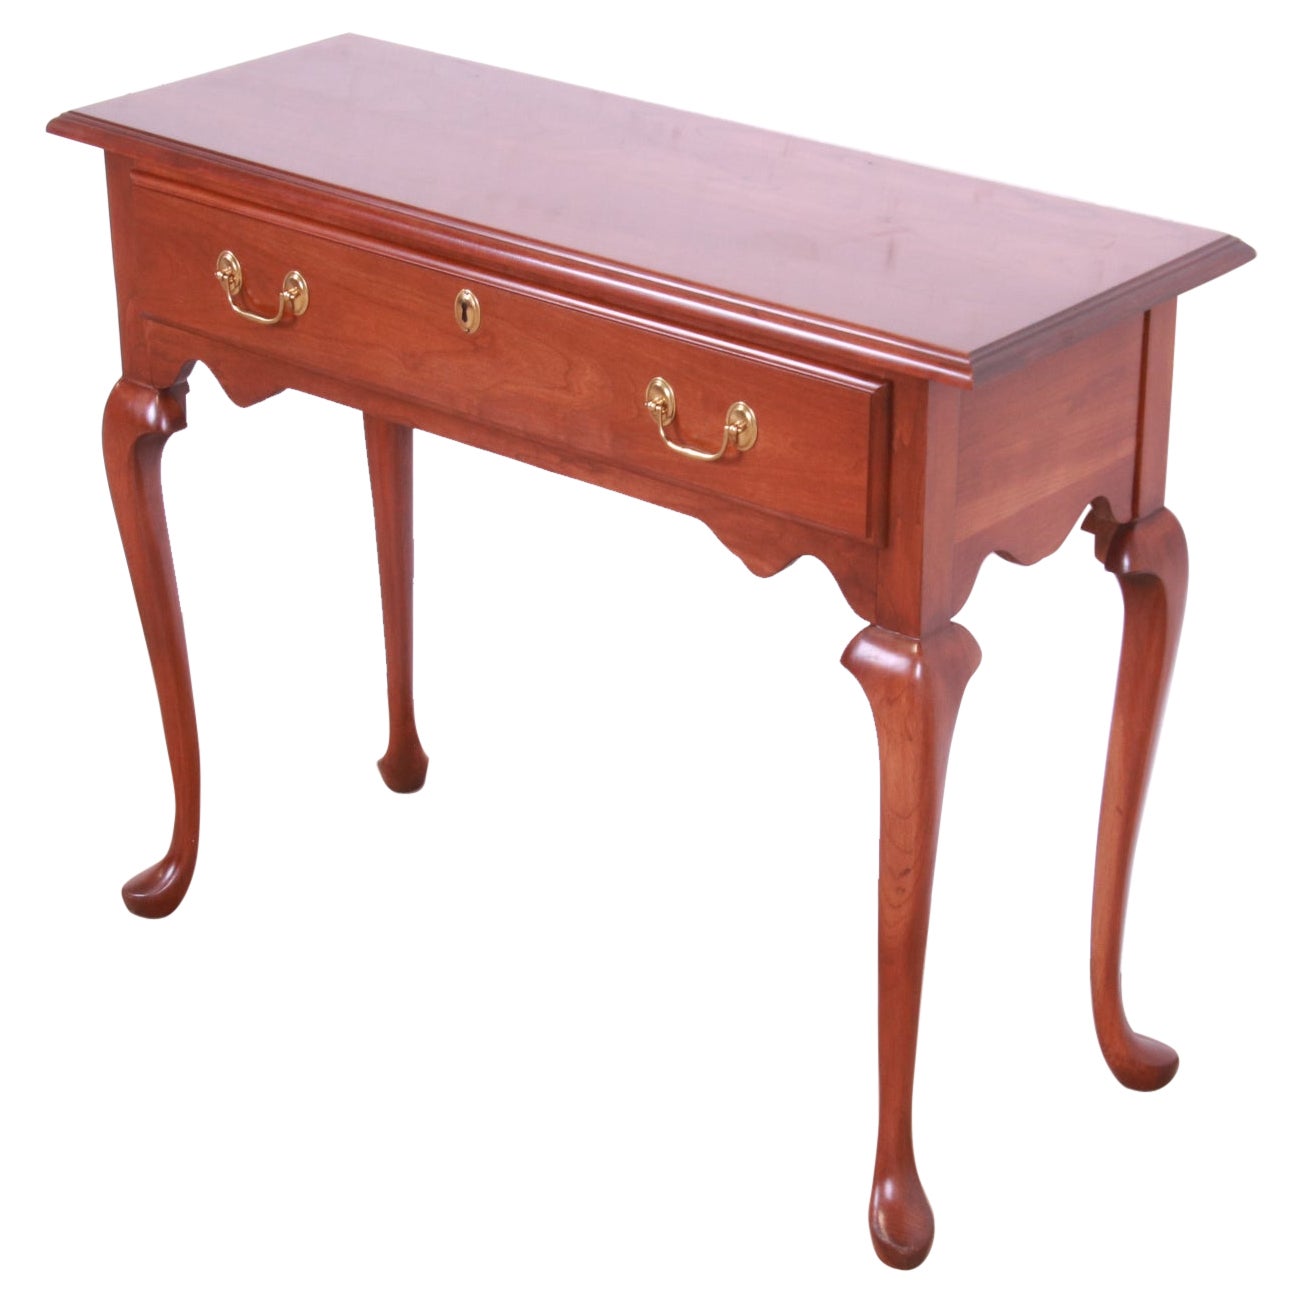 Harden Furniture Queen Anne Solid Cherry Wood Console or Sofa Table